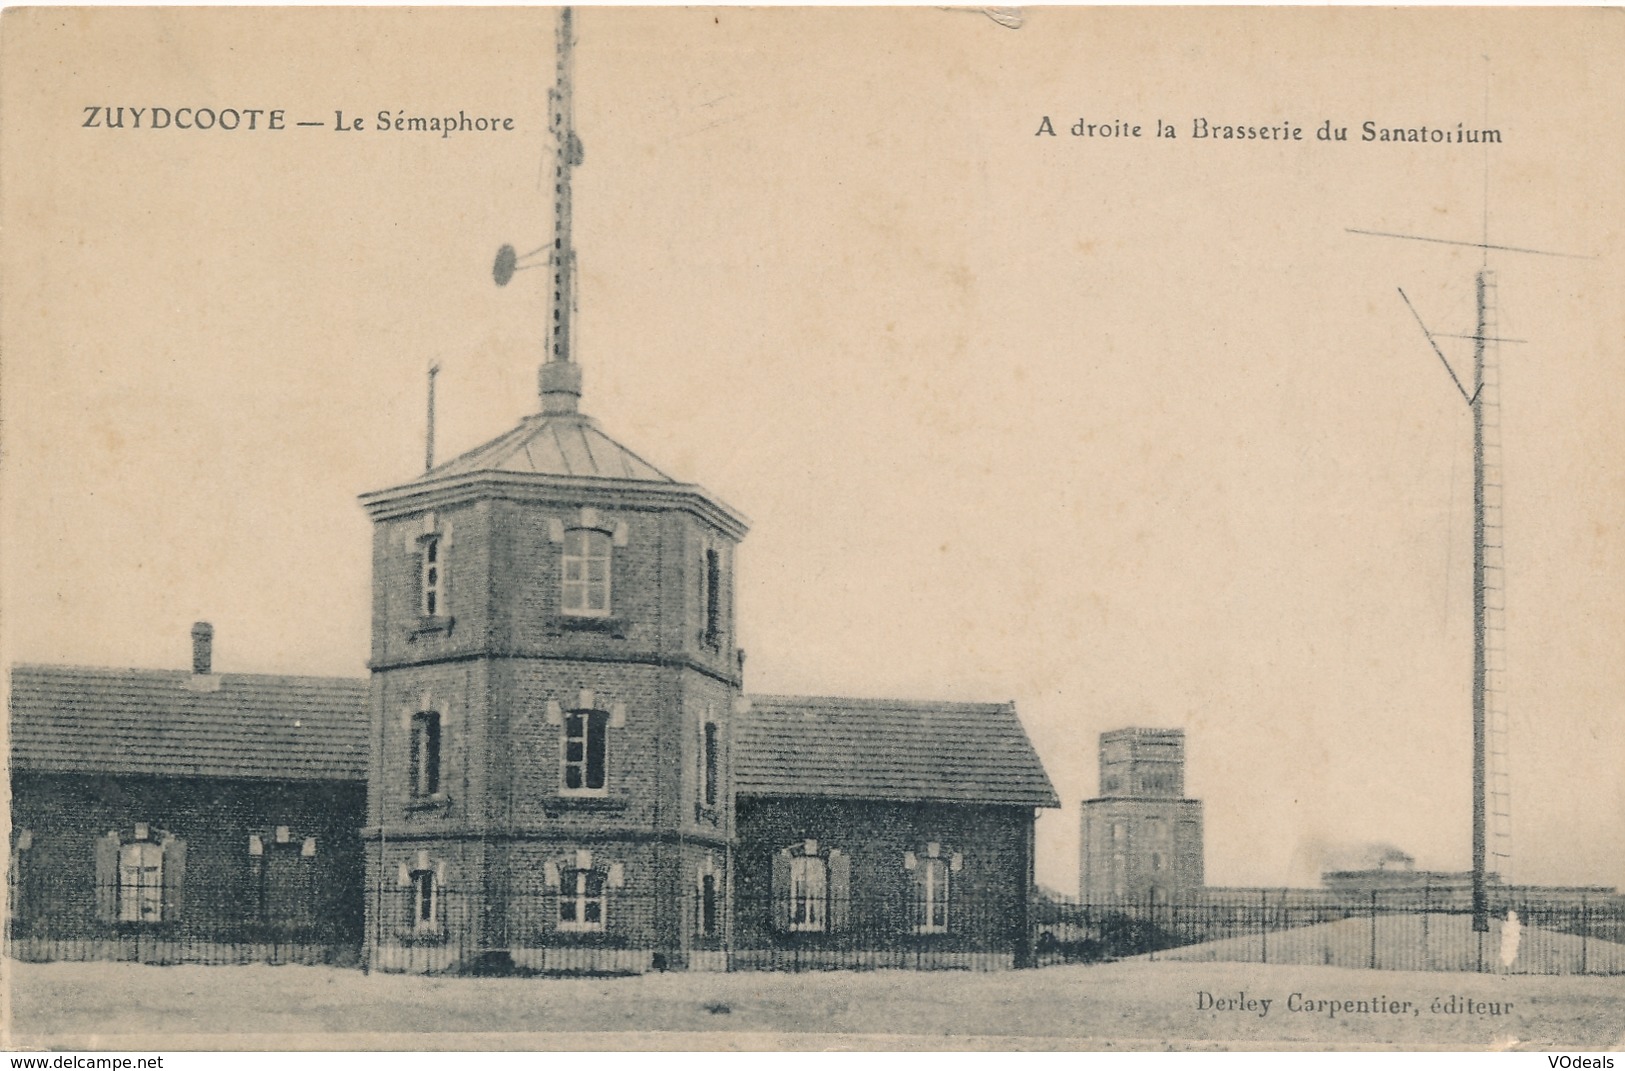 CPA - France - (59) Nord - Zuidcoote - Le Sémaphore - Dunkerque